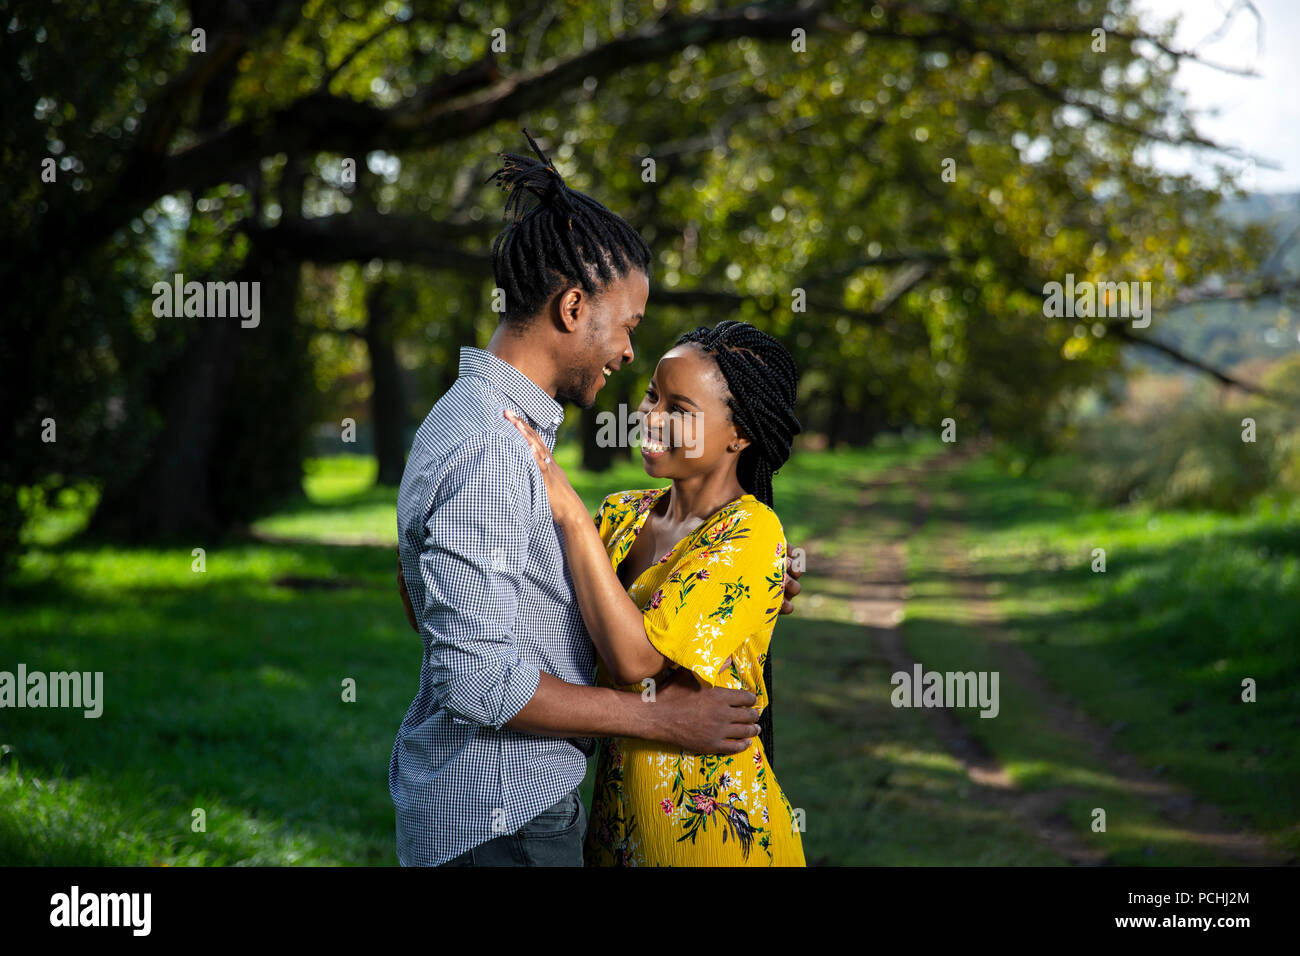 Couple embracing and smiling in a park Banque D'Images